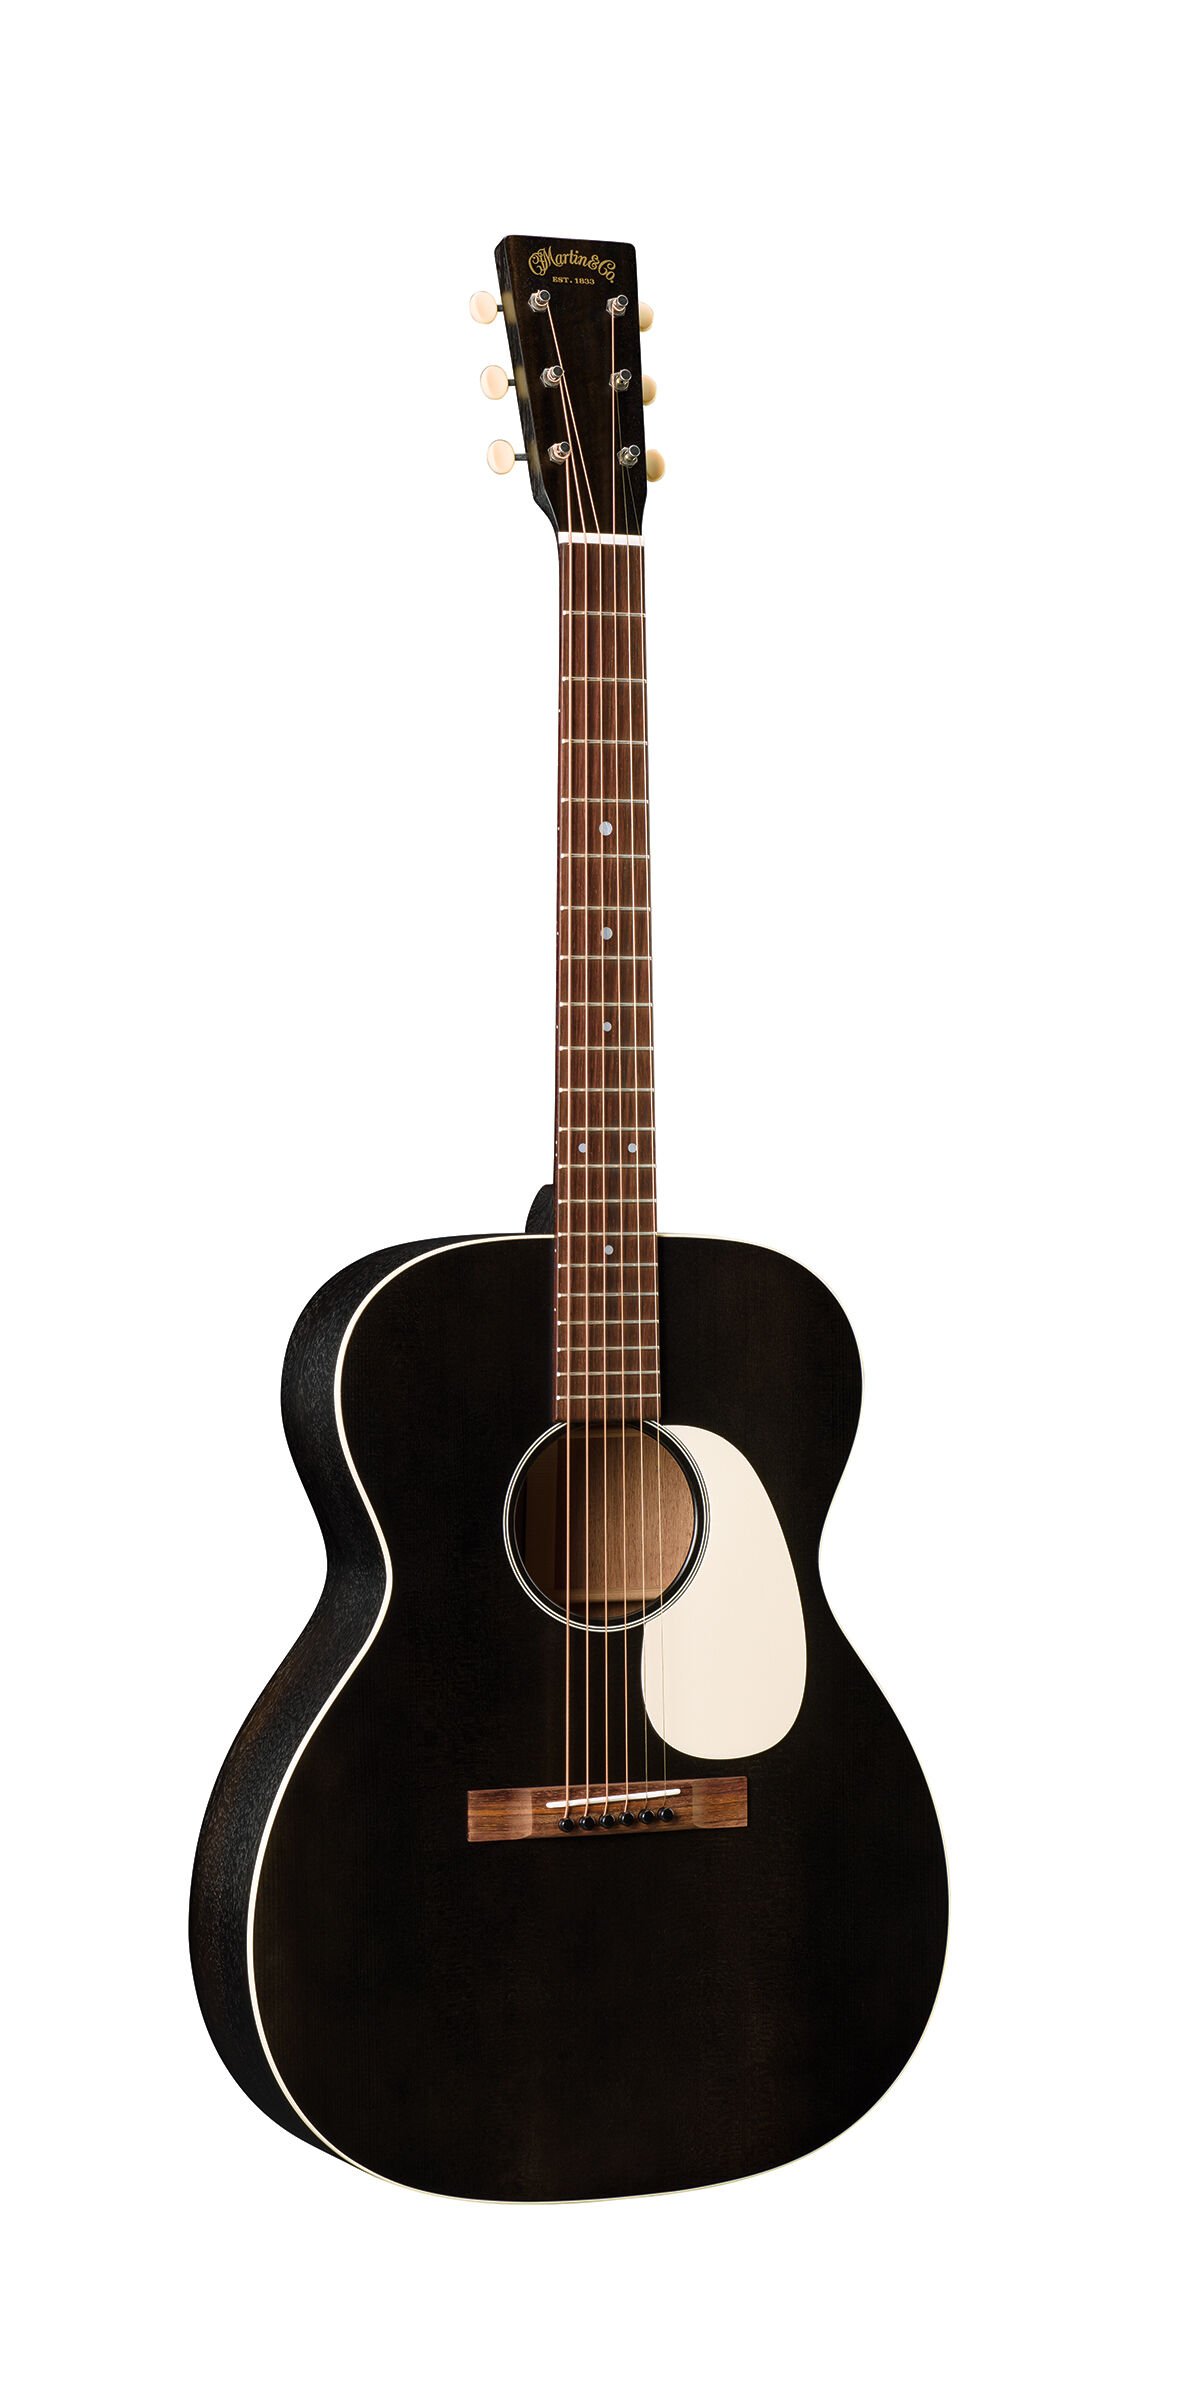 how to read martin guitar serial numbers